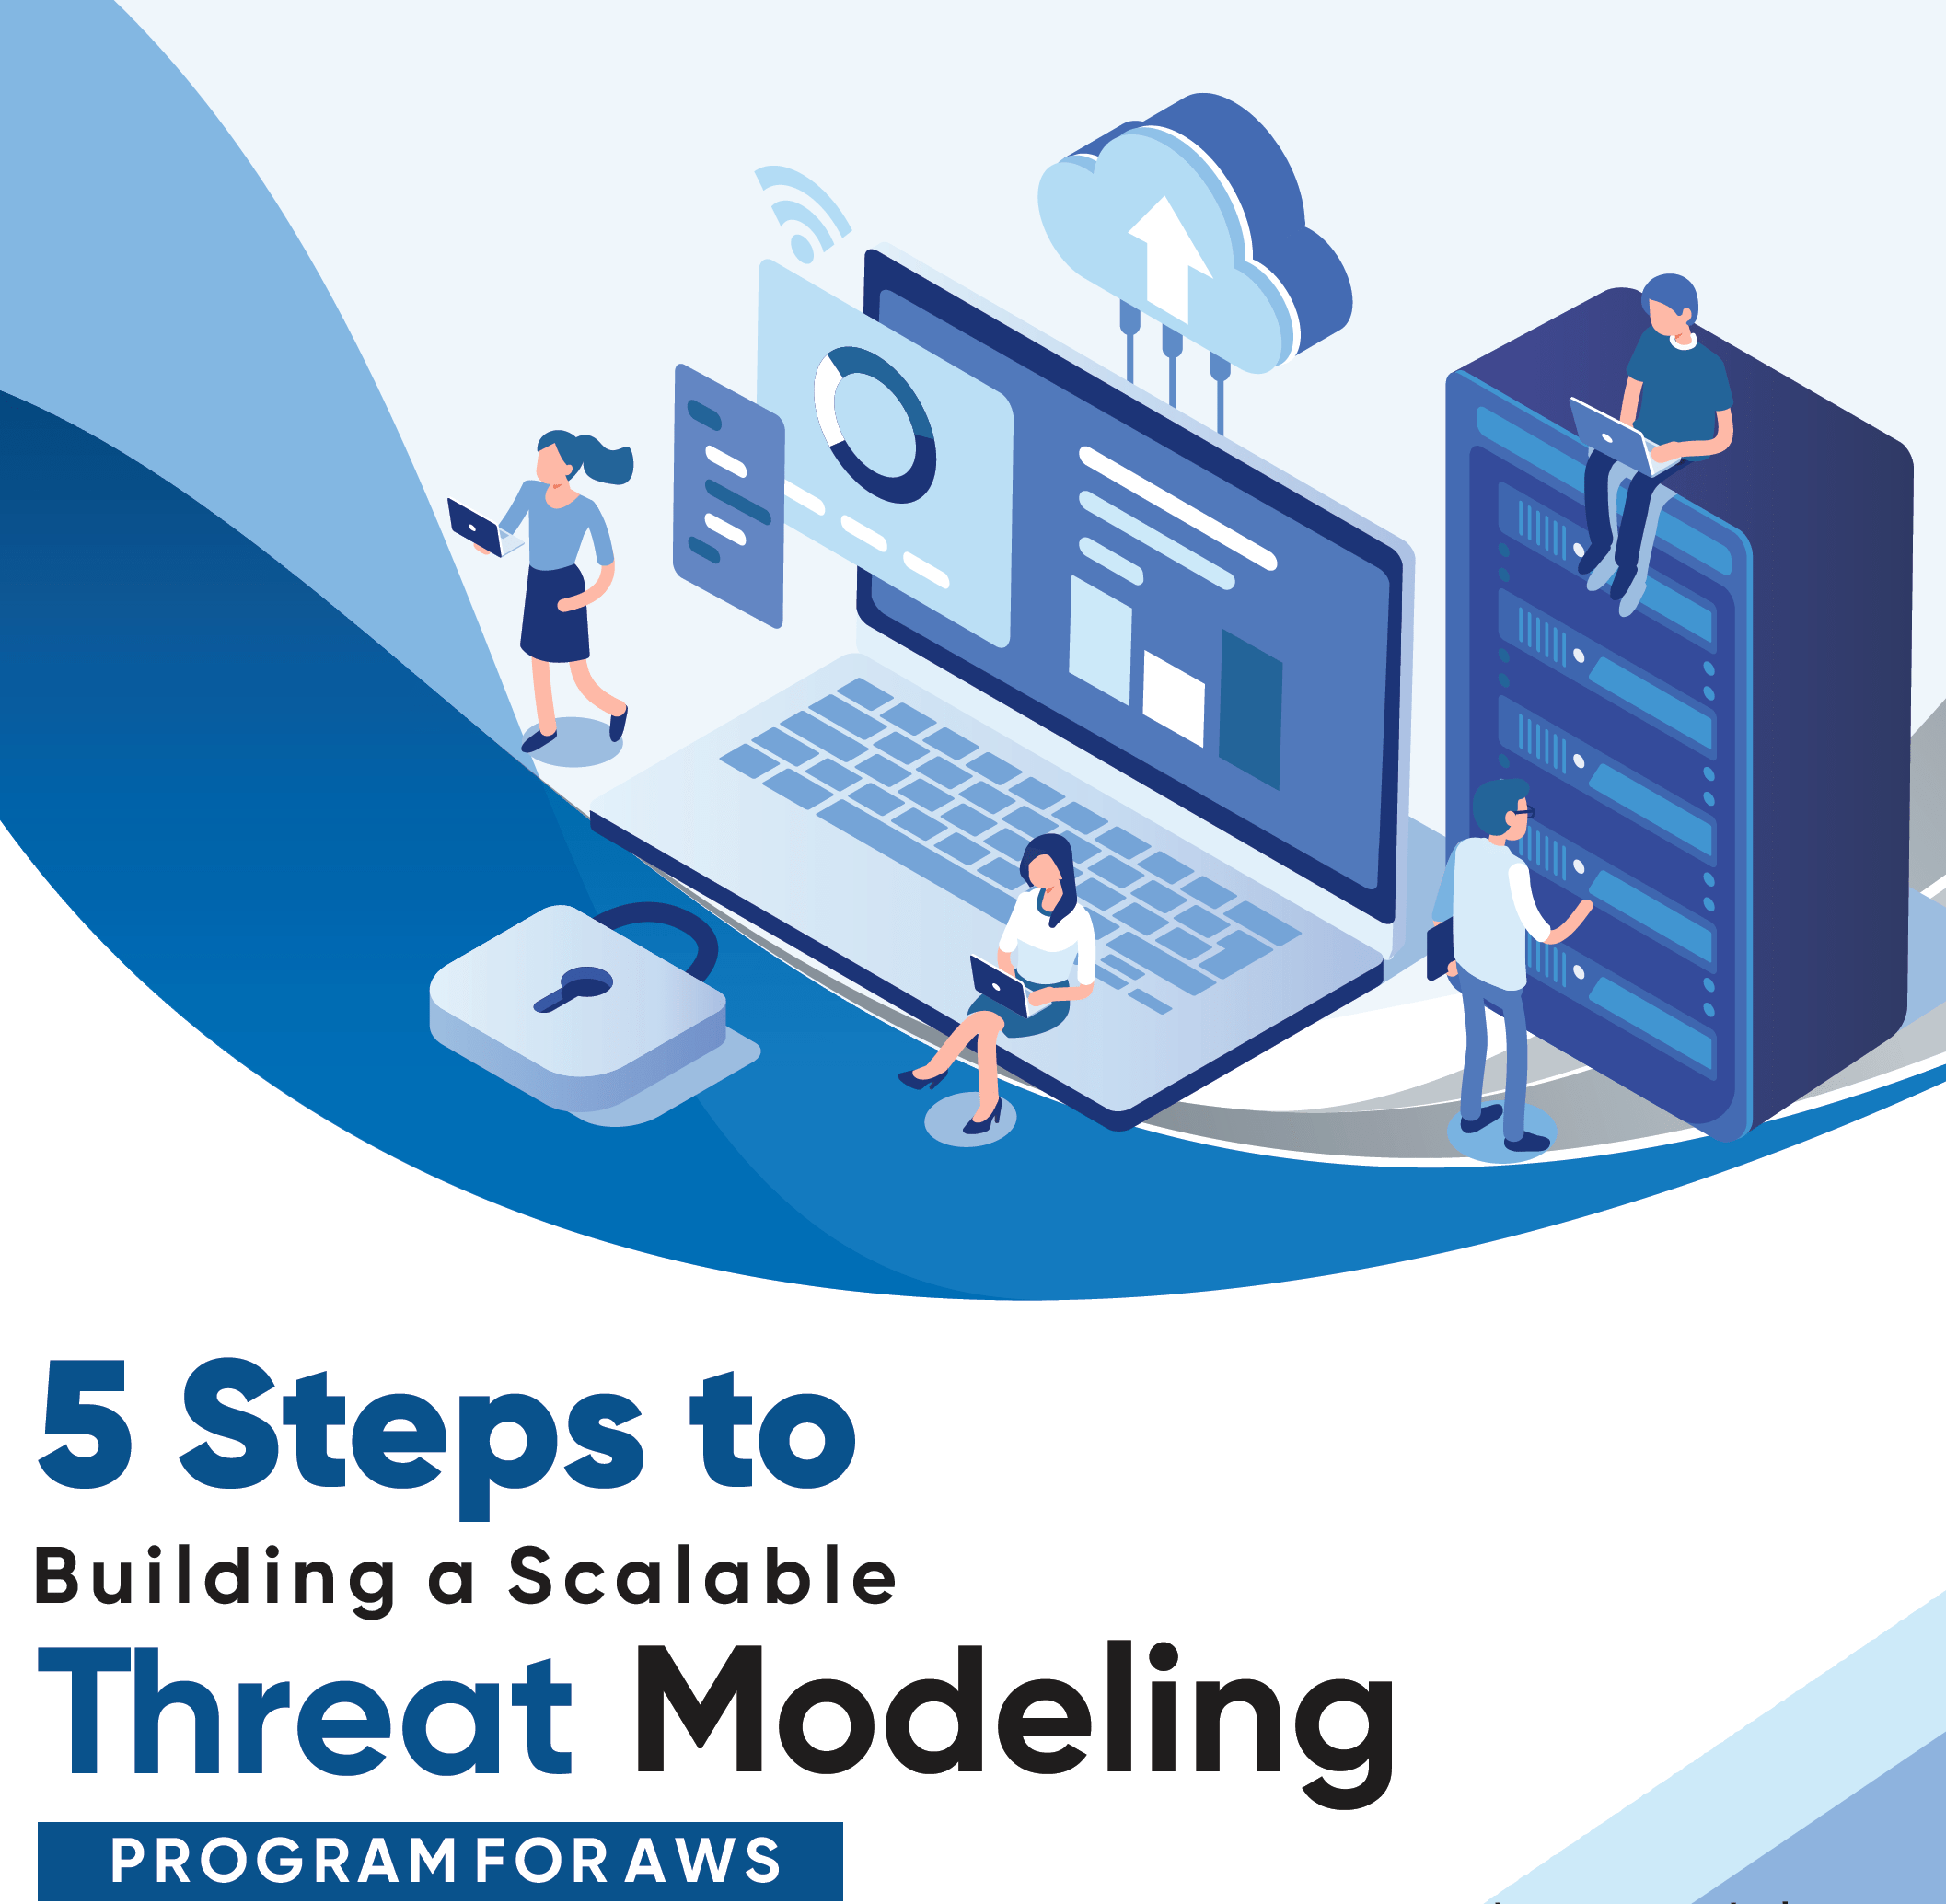 5 steps to building a scalable threat modeling